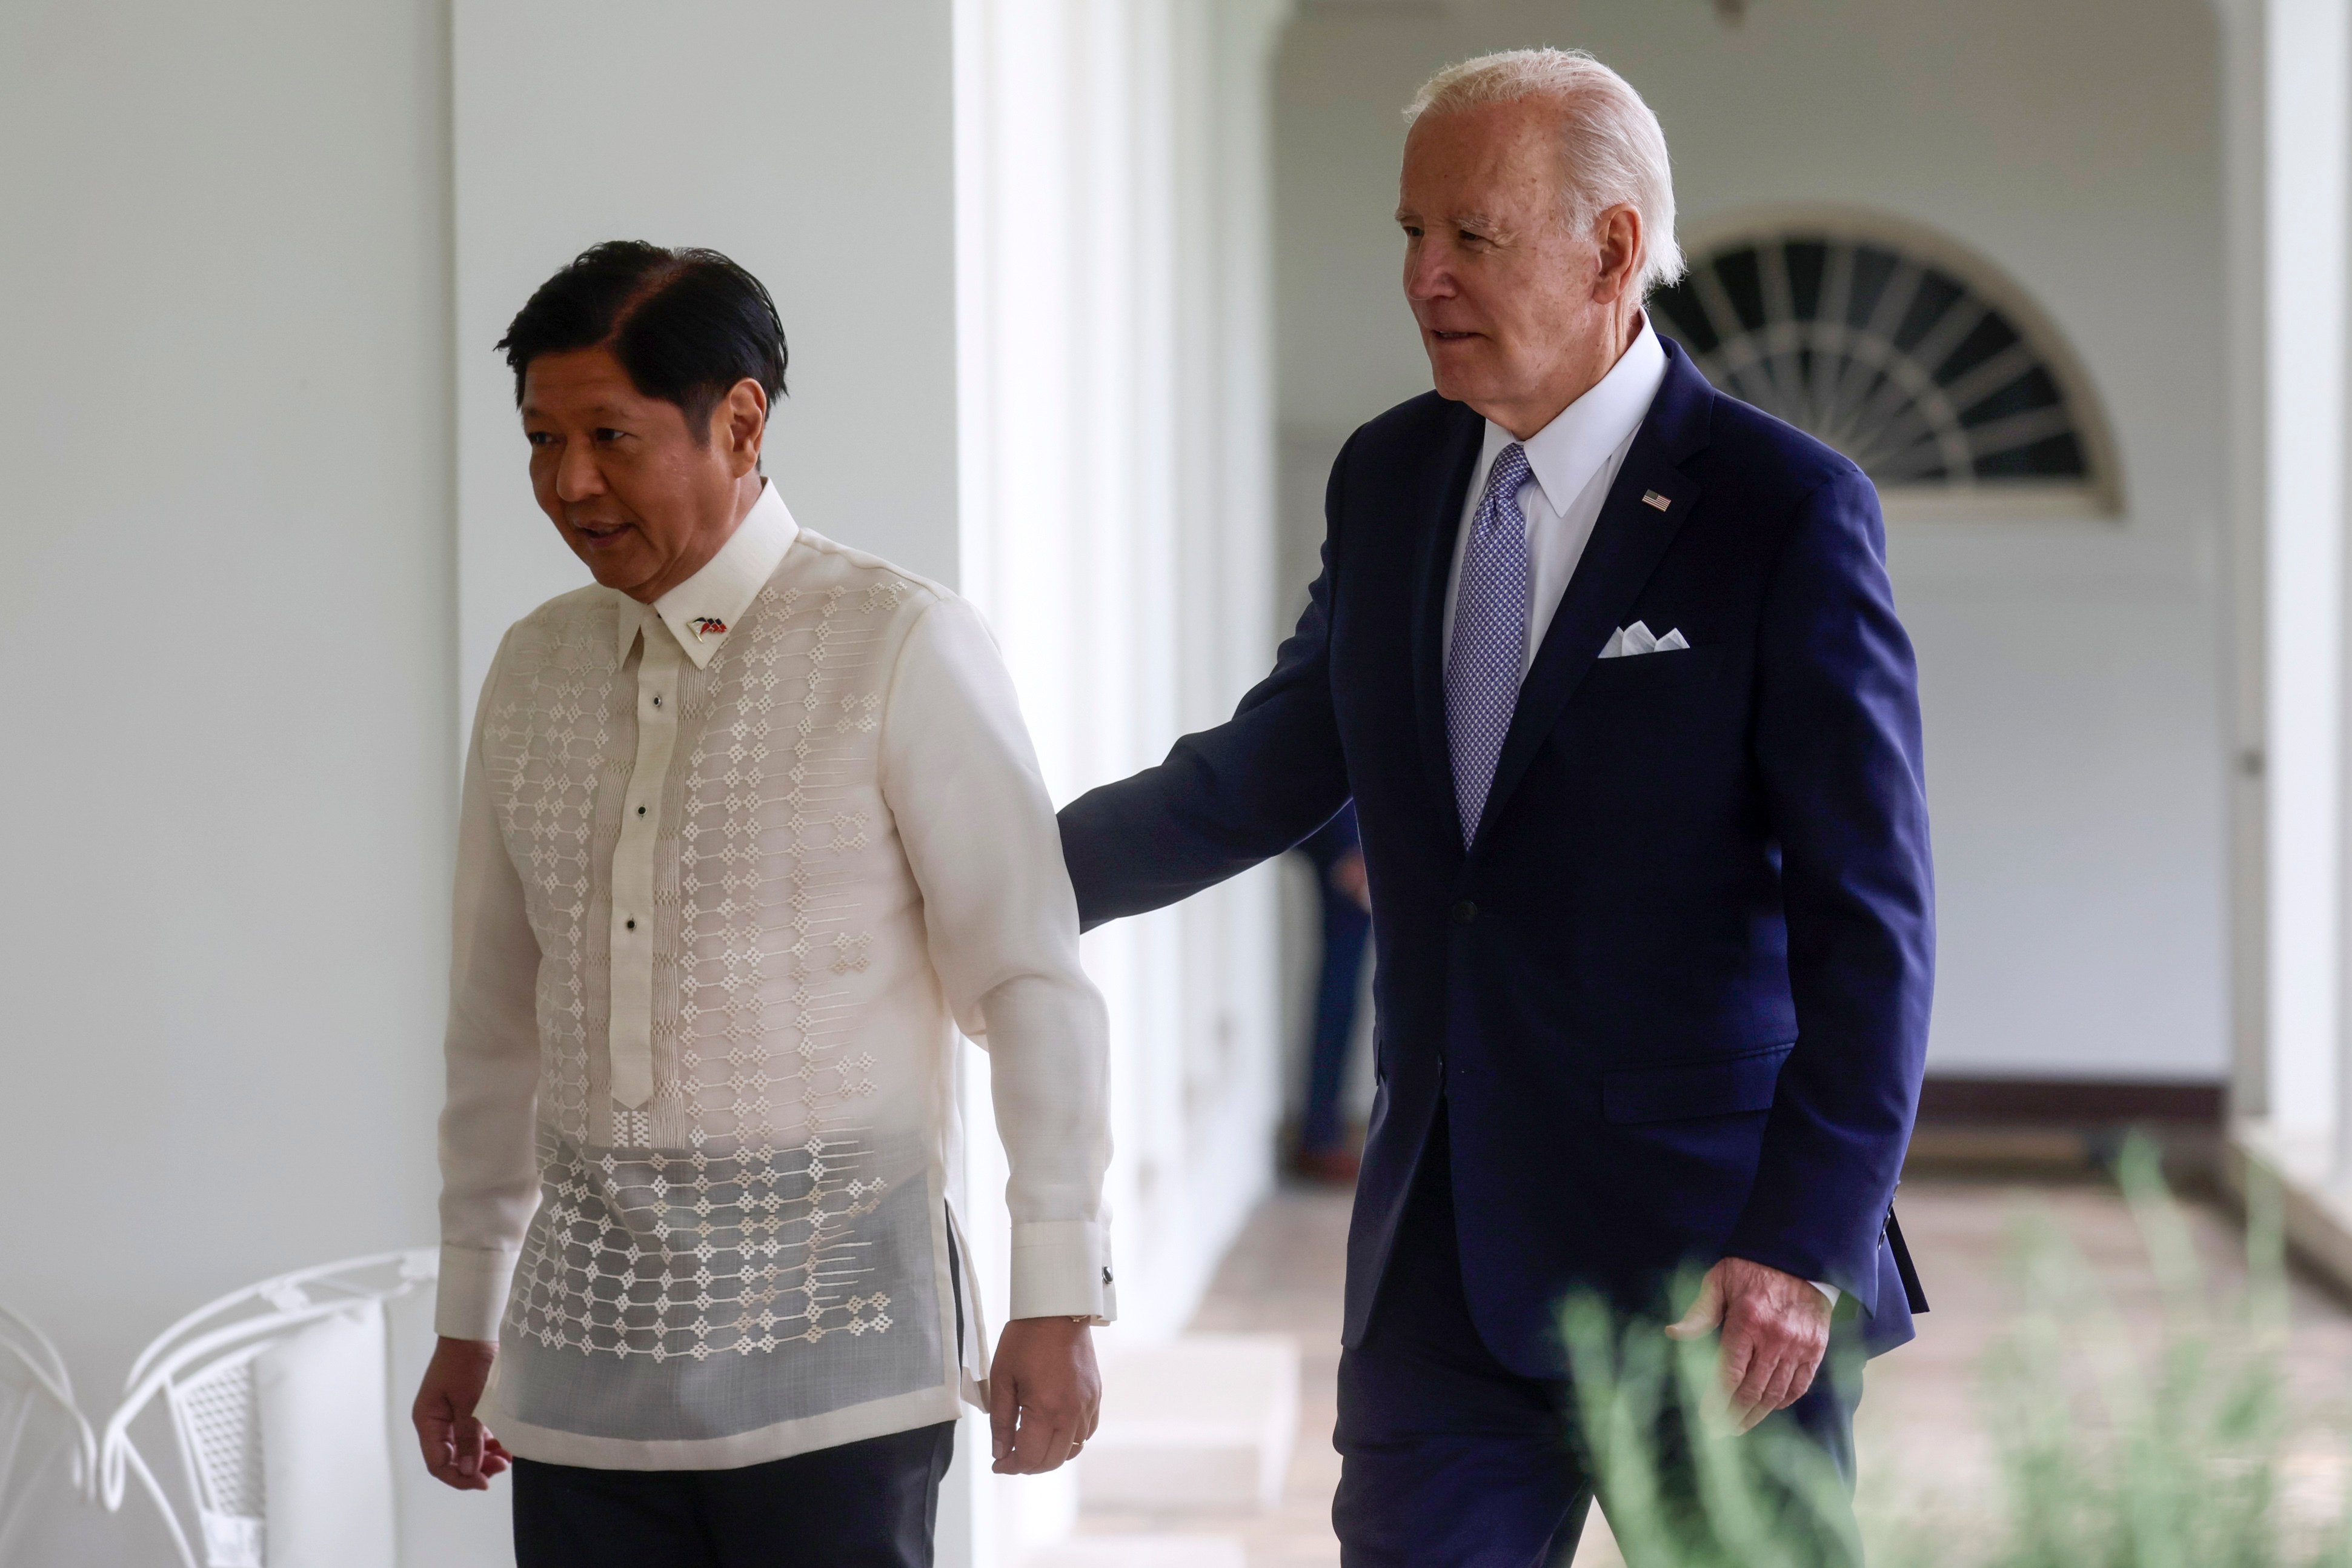 US President Joe Biden and Philippine President Ferdinand Marcos Jnr at the White House last year. Marcos Jnr is set to attend a trilateral summit in Washington on Thursday with Biden and Japanese Prime Minister Fumio Kishida. Photo: AP